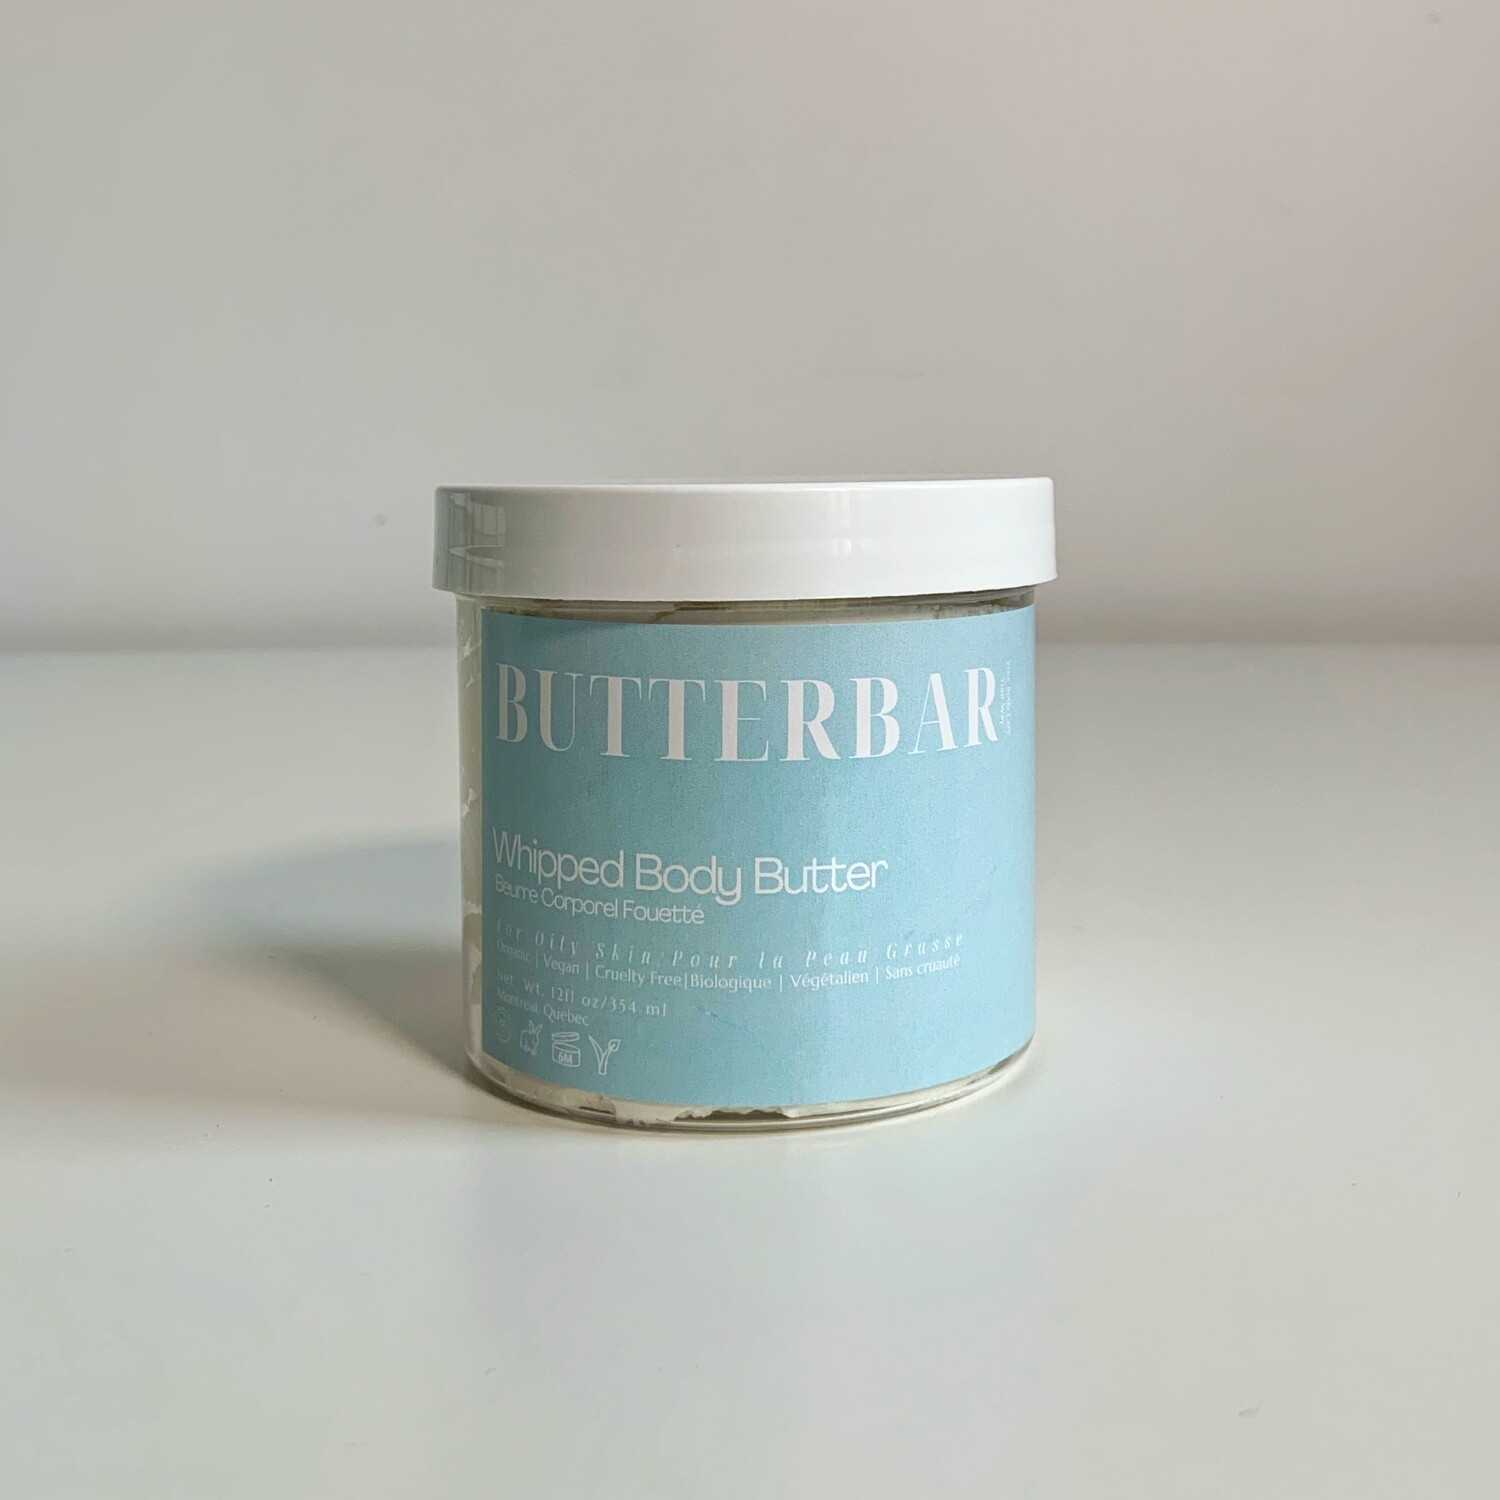 Whipped Body Butter for Oily Skin